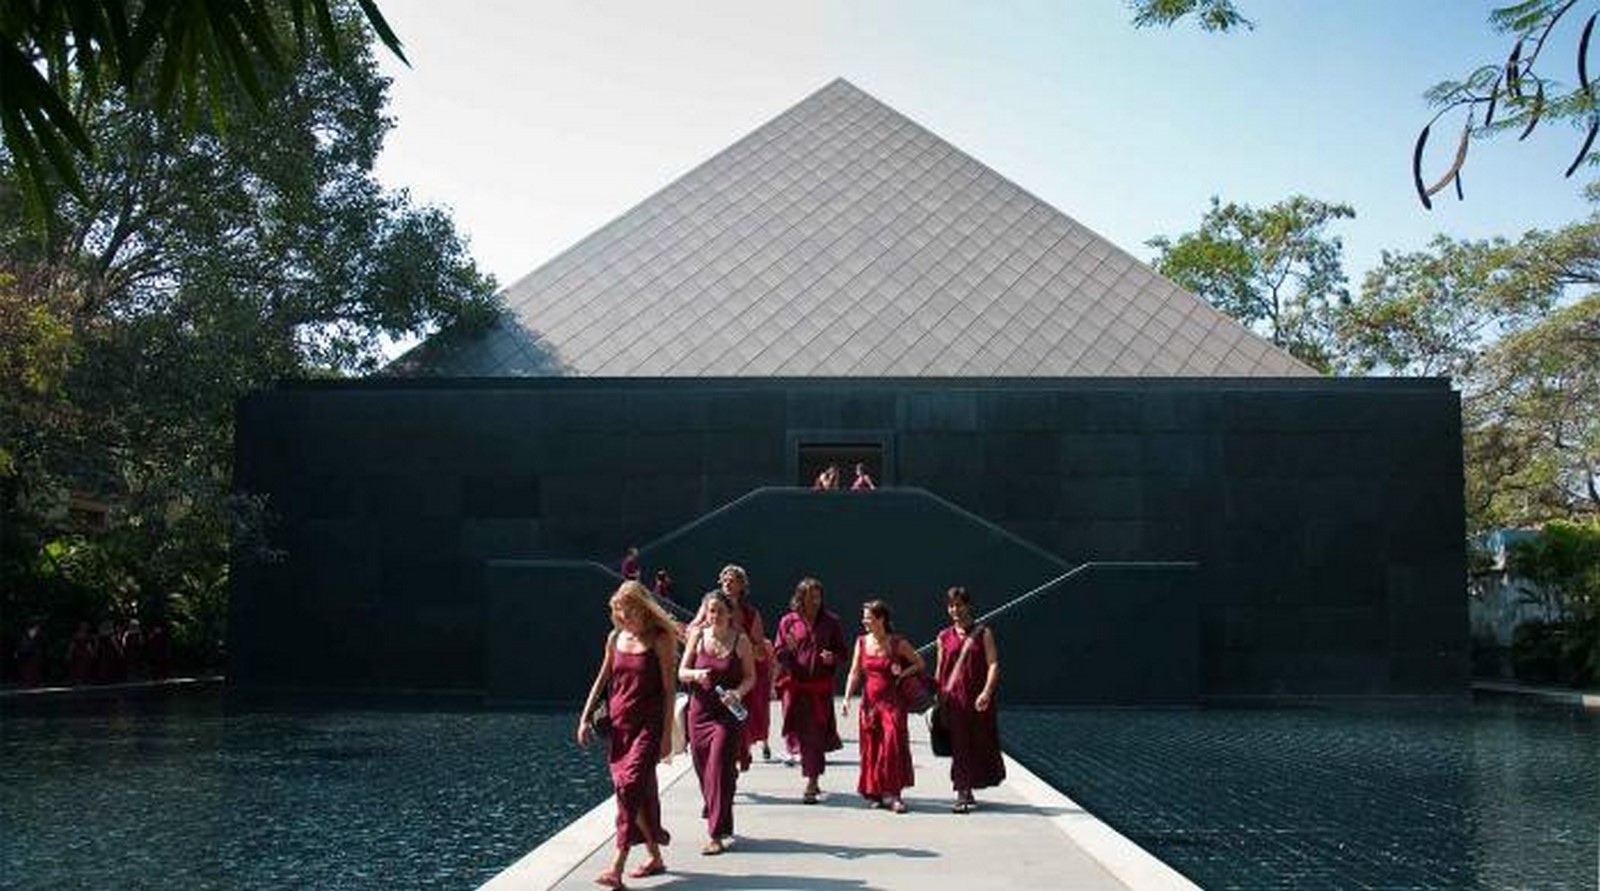 Osho International Meditation Resort, Pune by Hafeez Contractor: Learning to find Peace - Sheet5